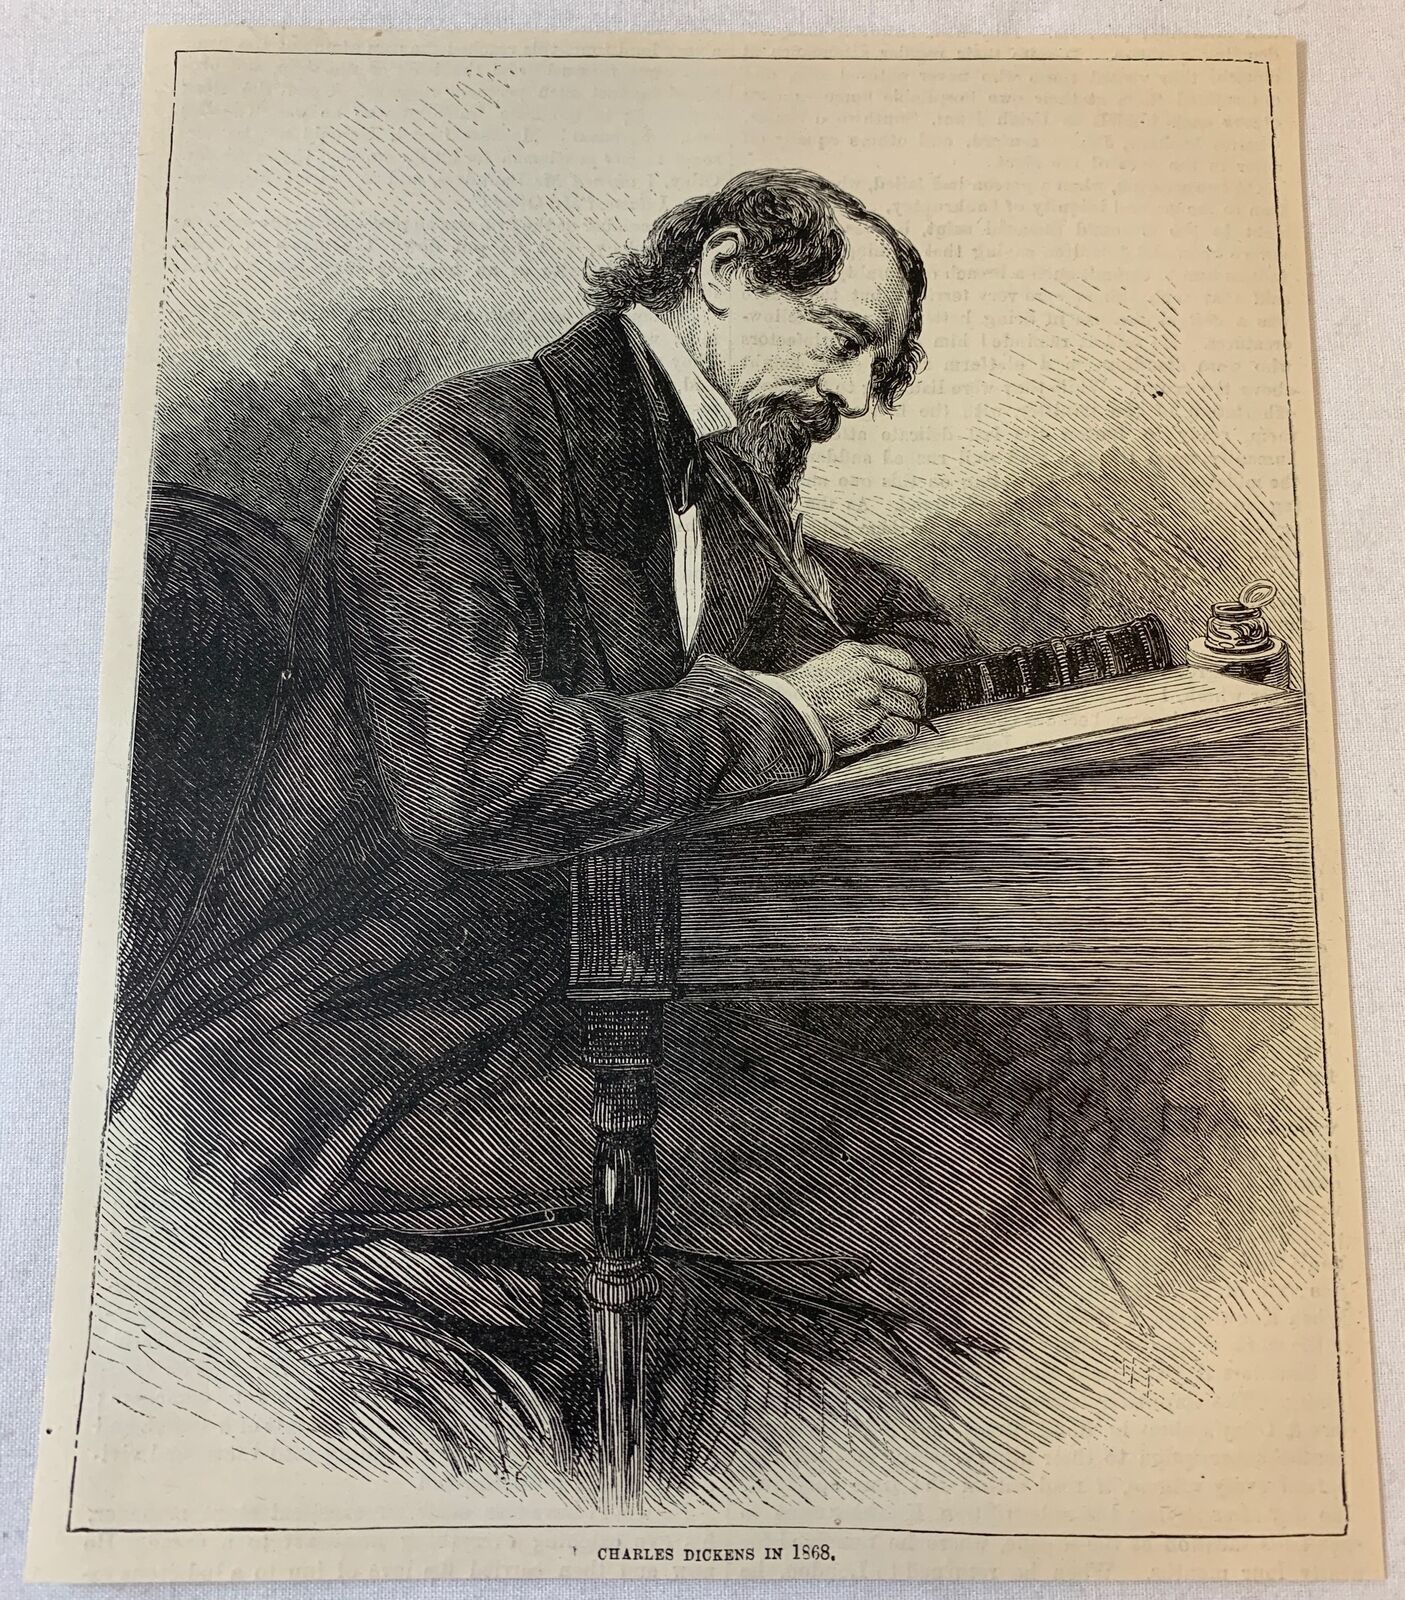 1887 magazine engraving~ CHARLES DICKENS WRITING AT HIS DESK in 1868